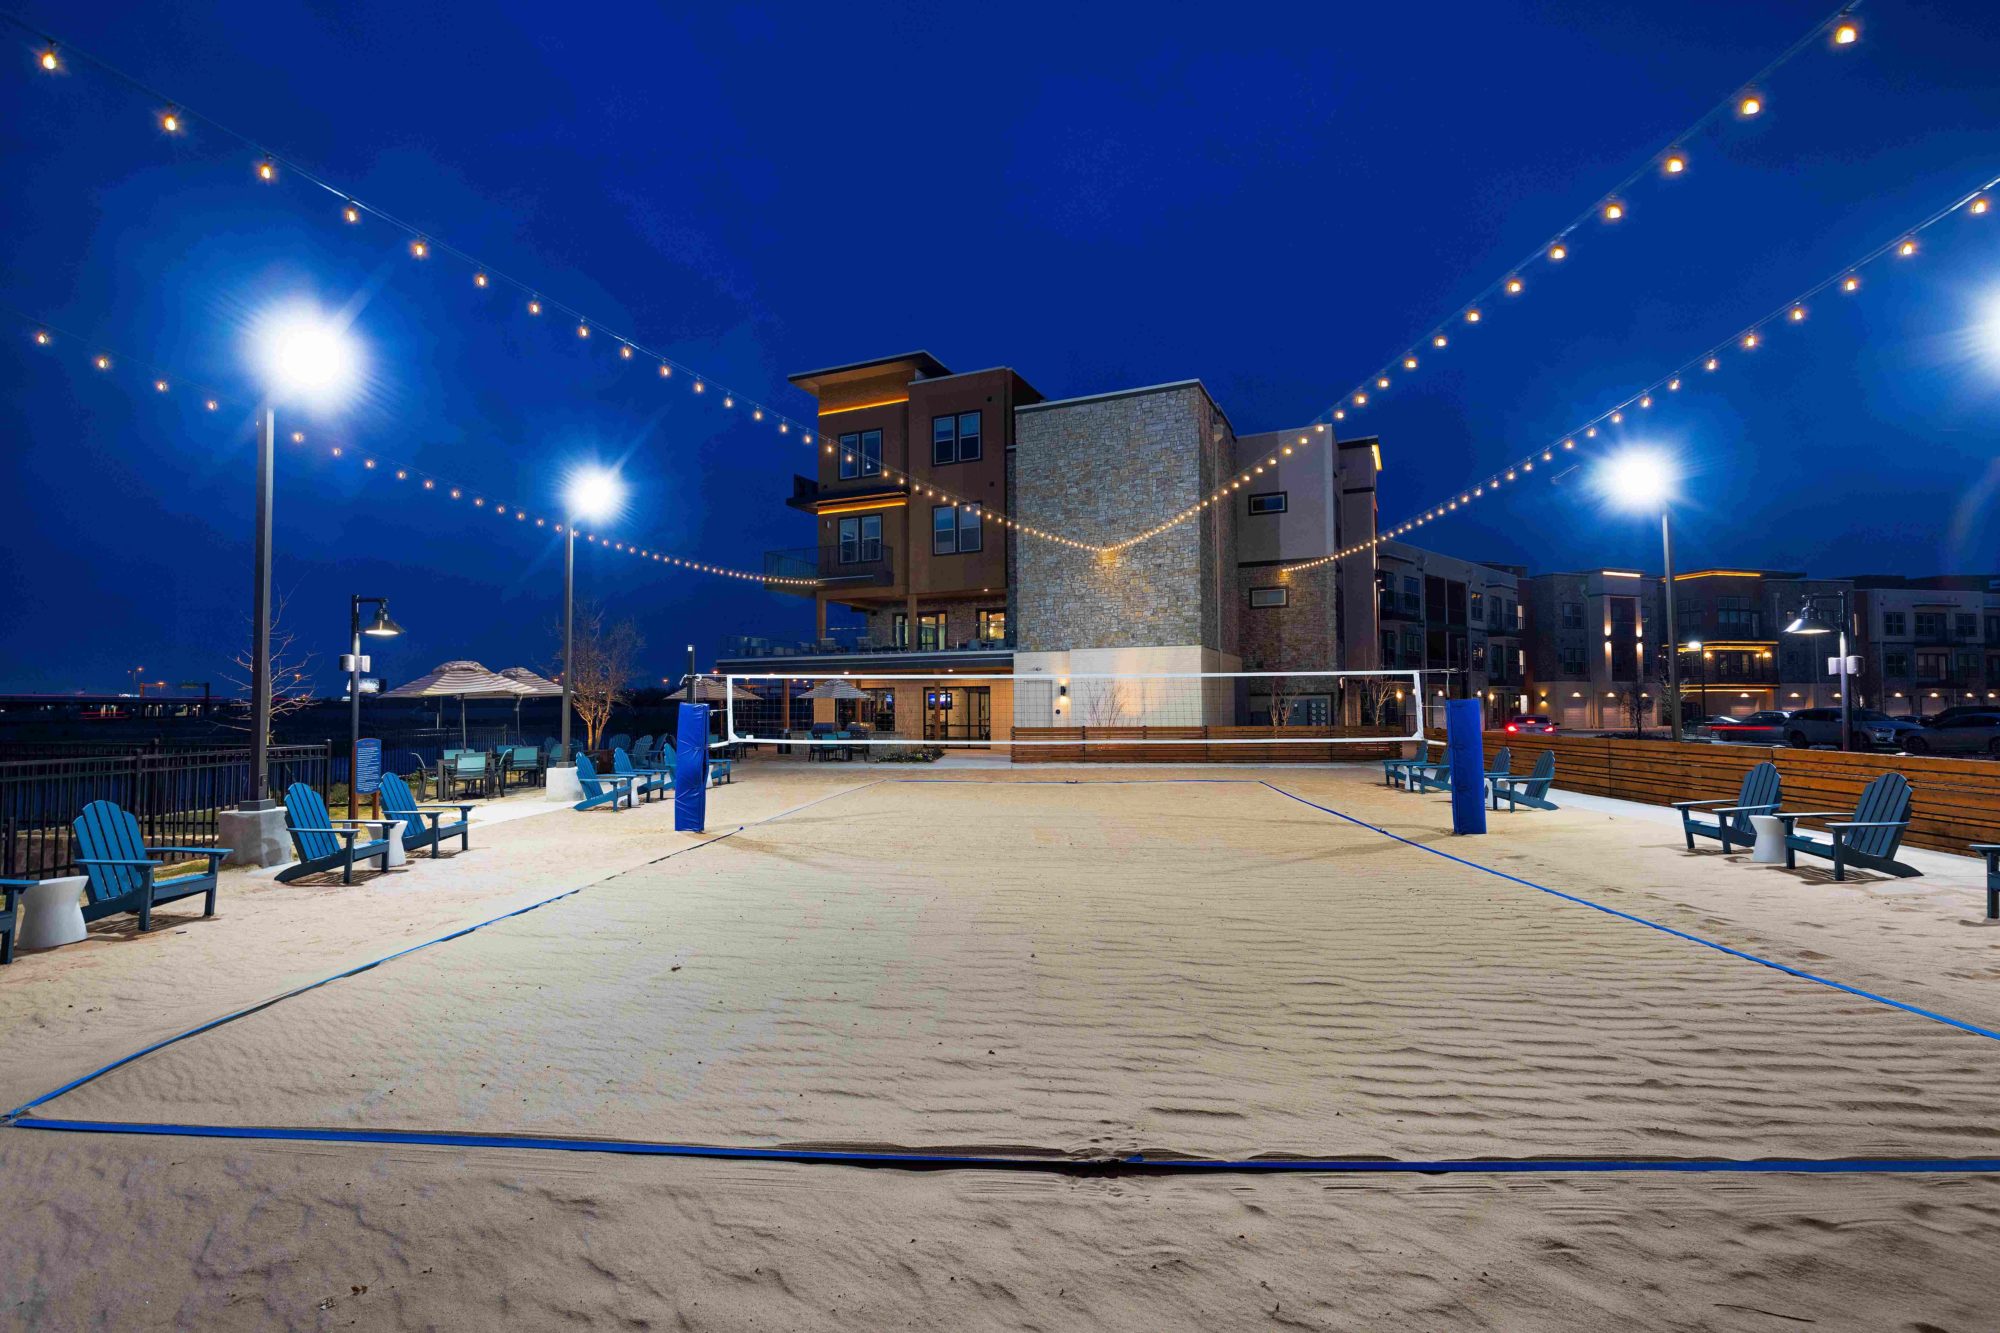 night shot of sand volleyball court with string lighting and property buildings in the background